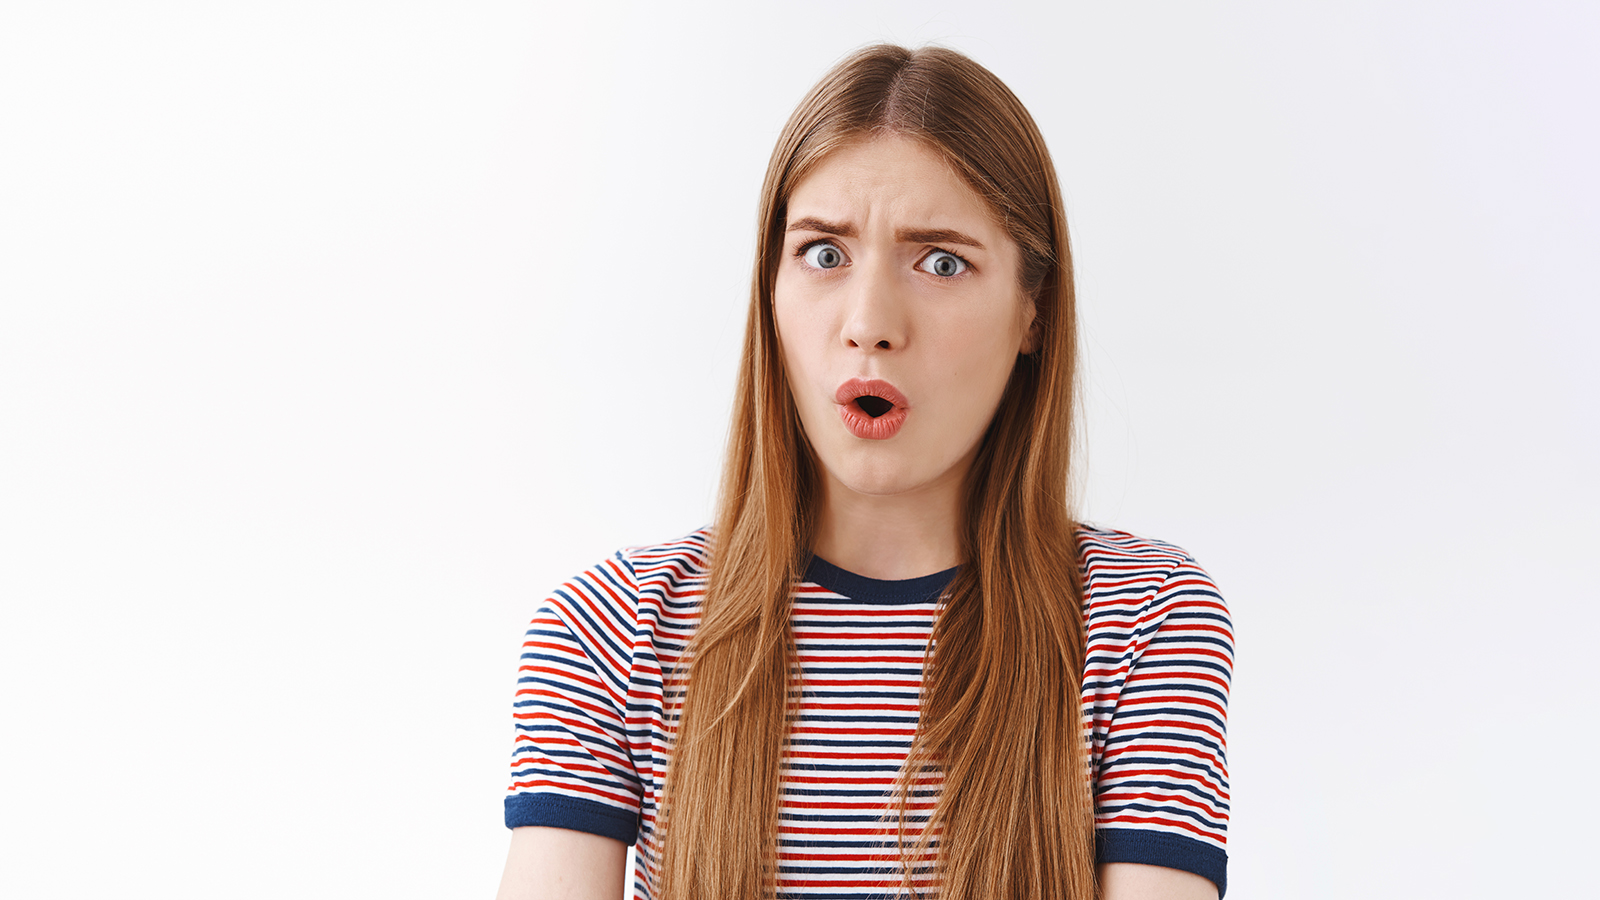 Close-up shocked and freak-out, concerned young serious-looking woman stare skeptical and confused, say what, open mouth gasping alarmed, frowning doubtful and disappointed, white background